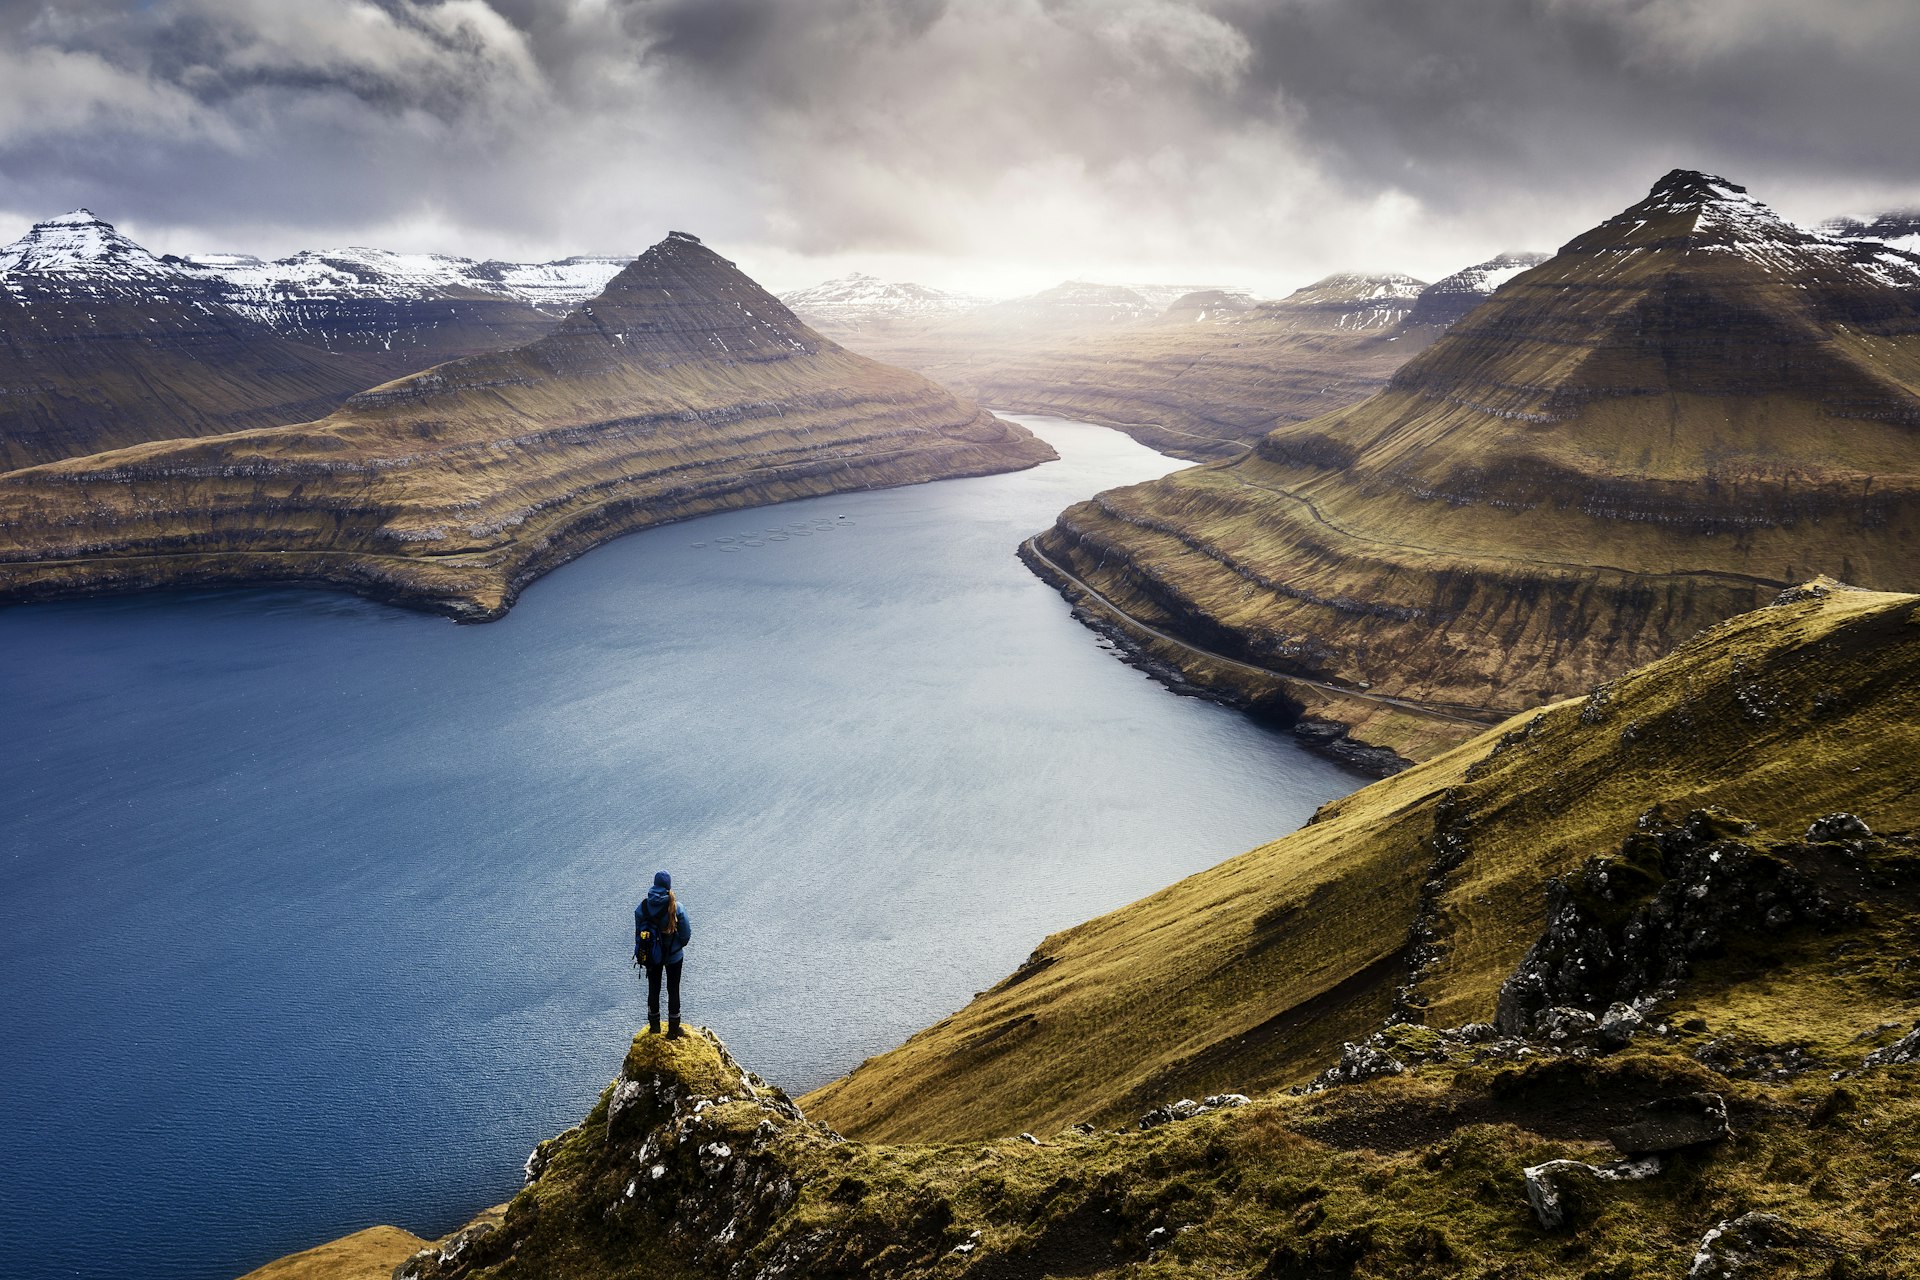 500px Photo ID: 219544533 - https://youtu.be/RzTW-KugaCQ.https://youtu.be/RzTW-KugaCQ.The beautiful view above the town.Funningur in the Faroe Islands. This epic location is a must visit when you're there!